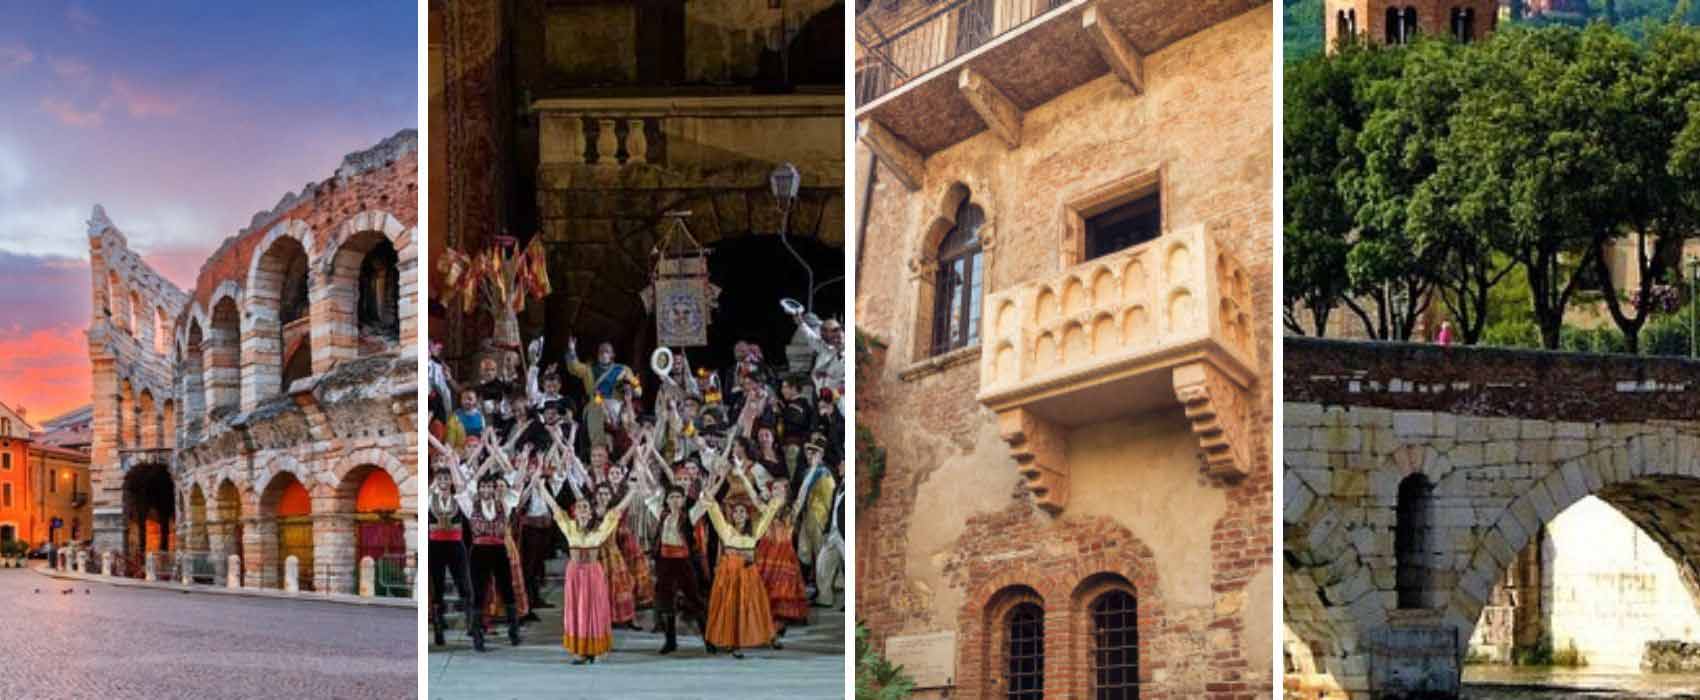 Verona from 15/8 to 19/8: The heroines of the Arena